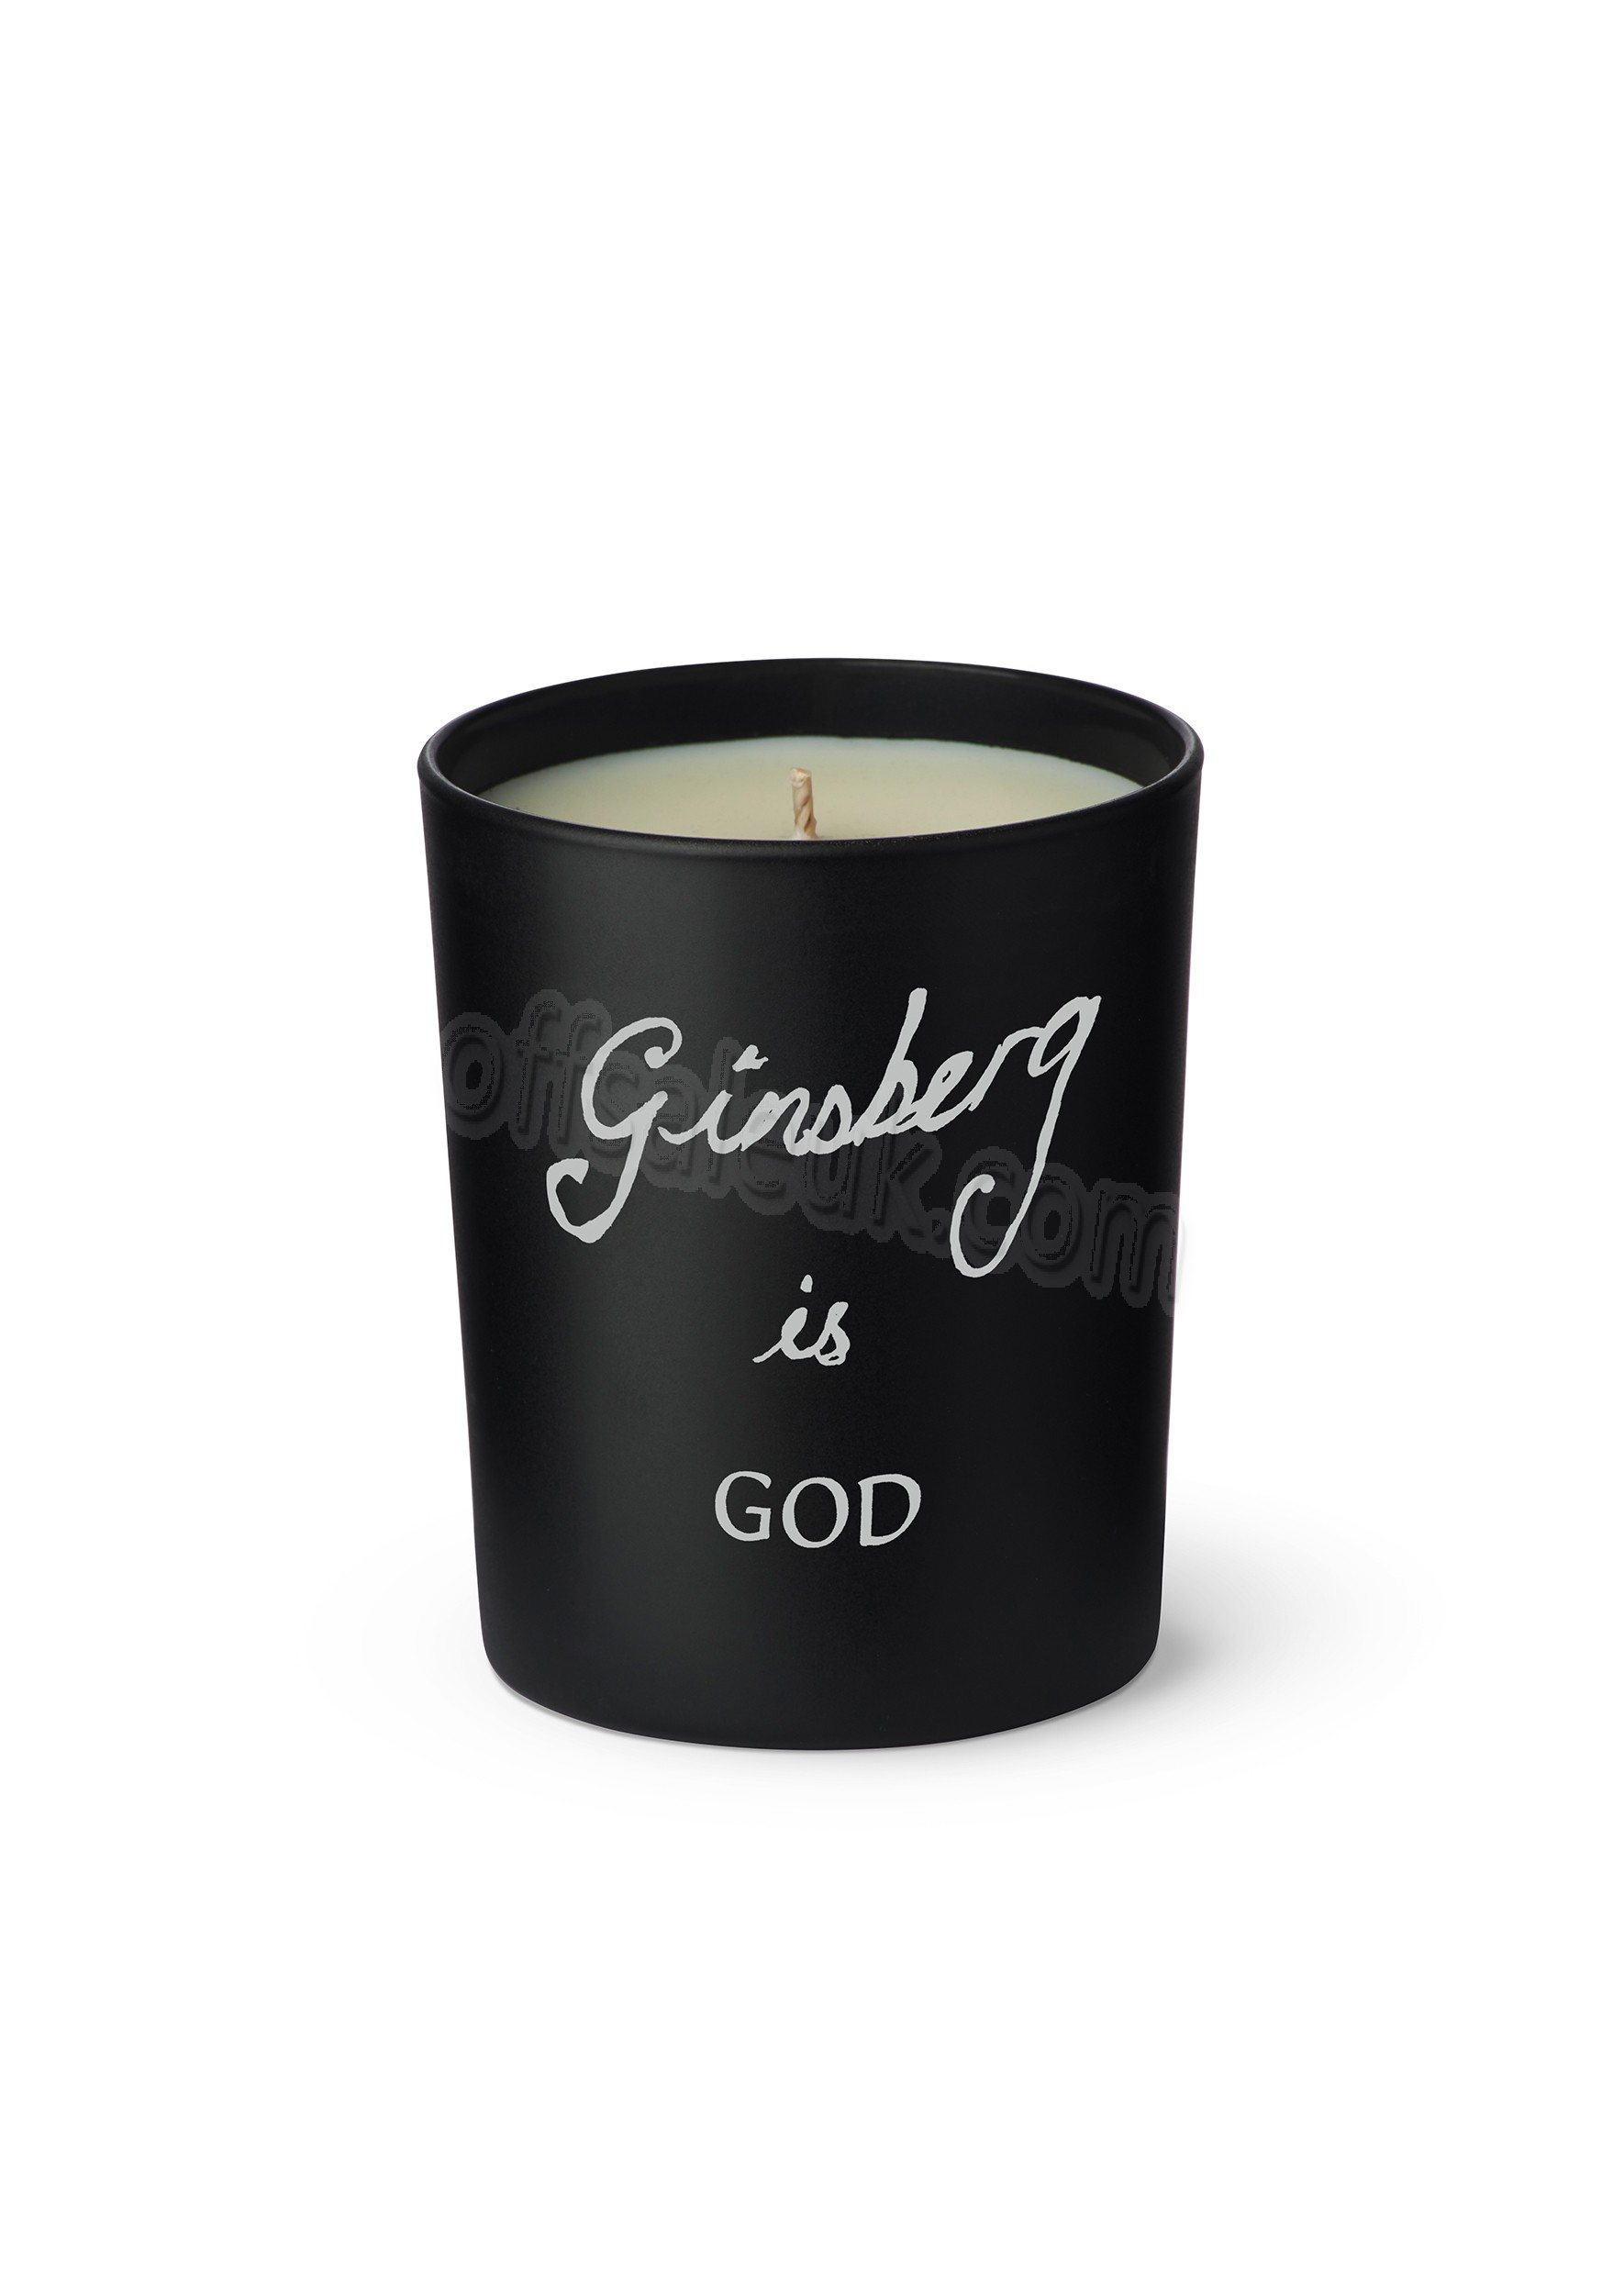 Cheap Ginsberg is God Candle - Cheap Ginsberg is God Candle